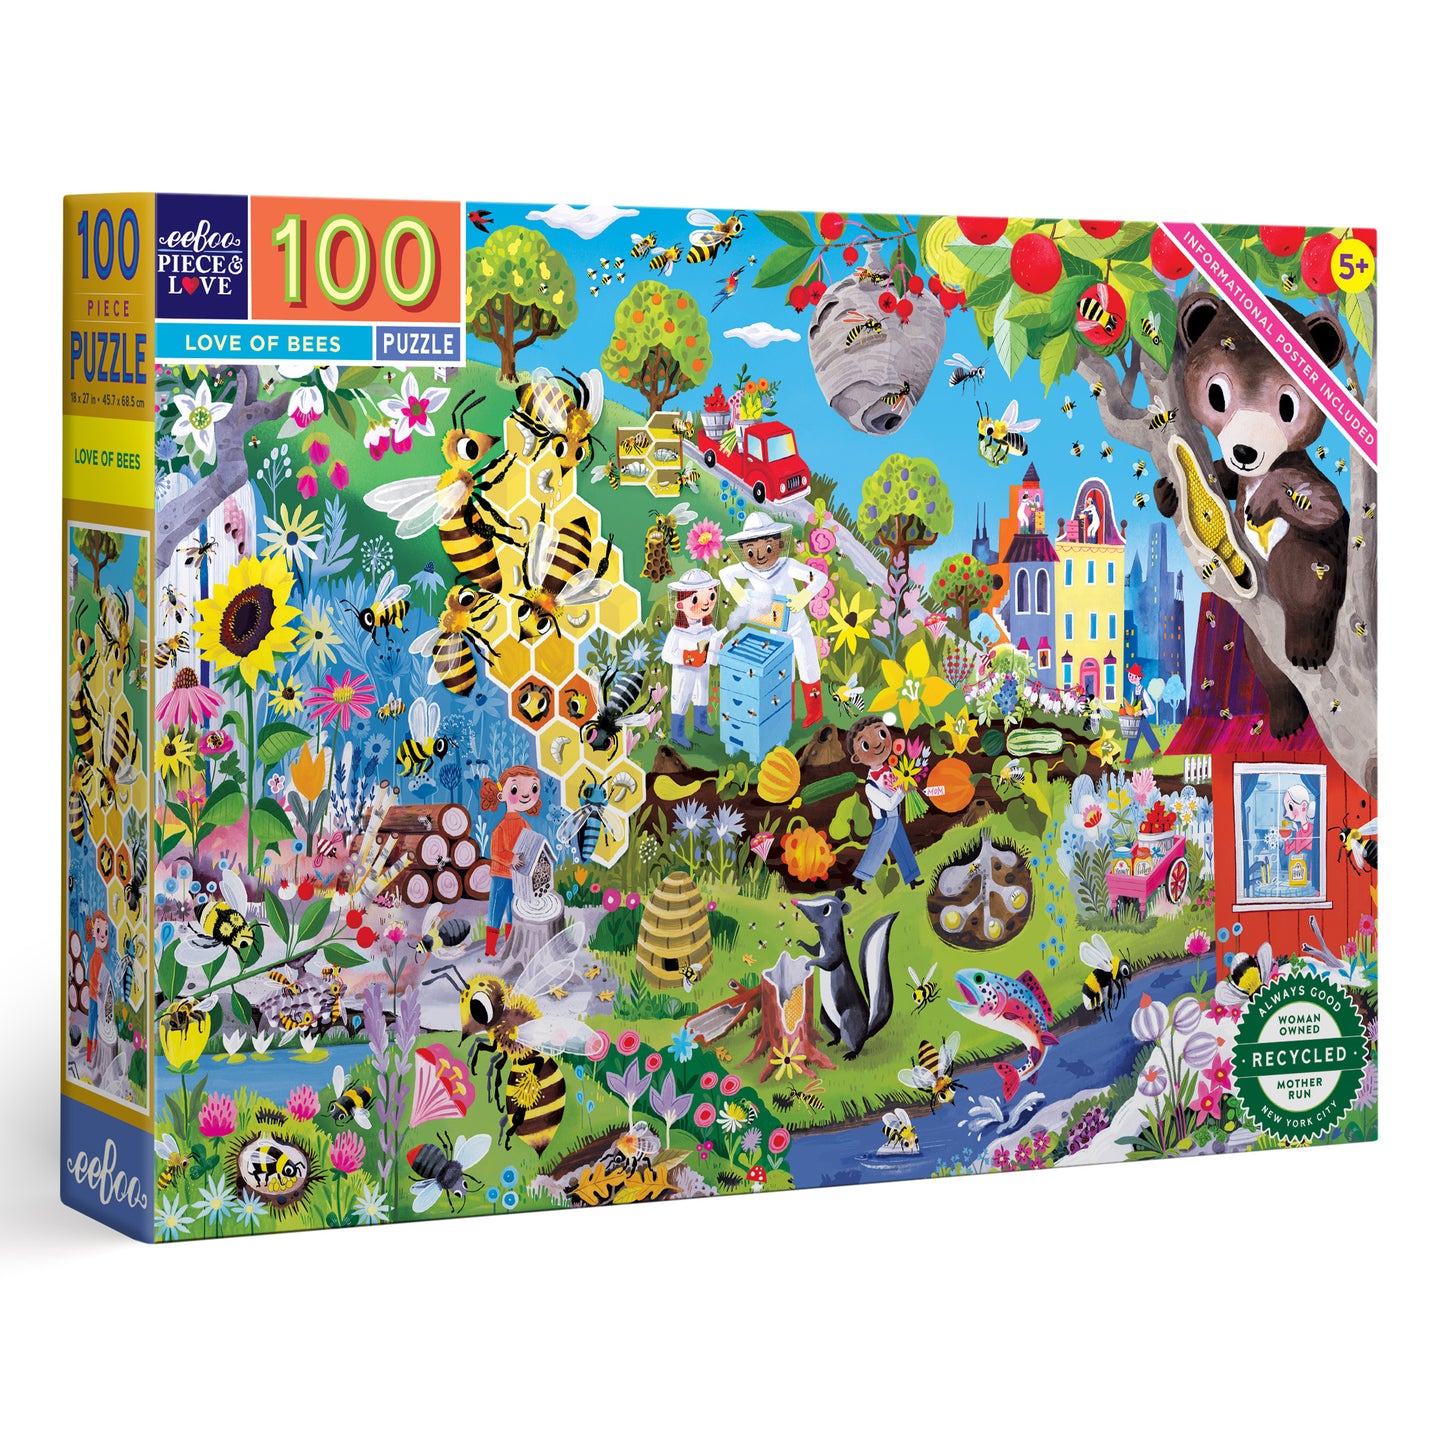 Love of Bees 100 Piece Jigsaw Puzzle eeBoo Gifts for Kids 5+